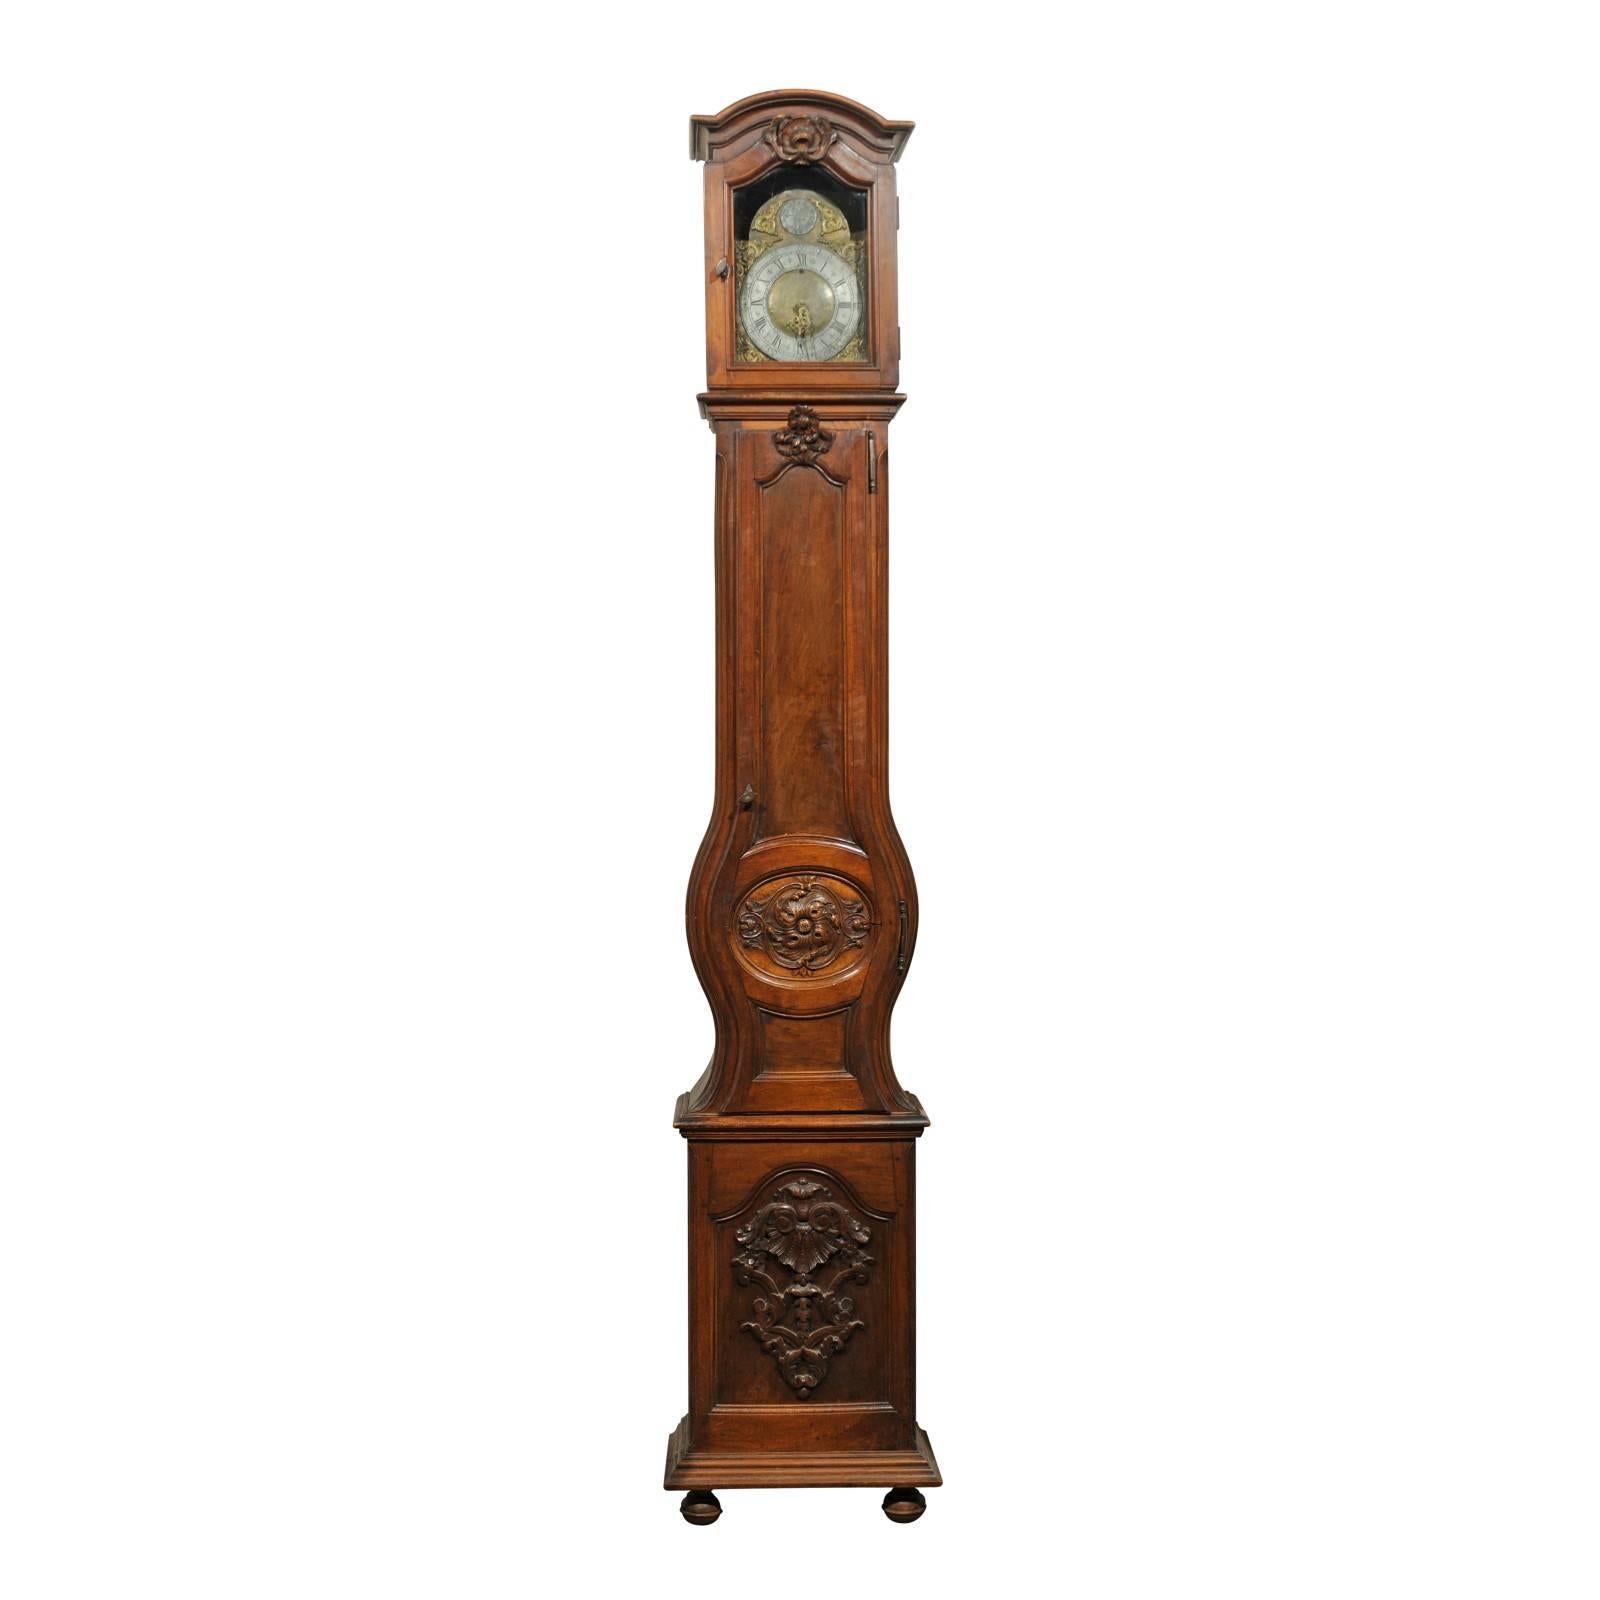 How much is a grandfather clock worth?